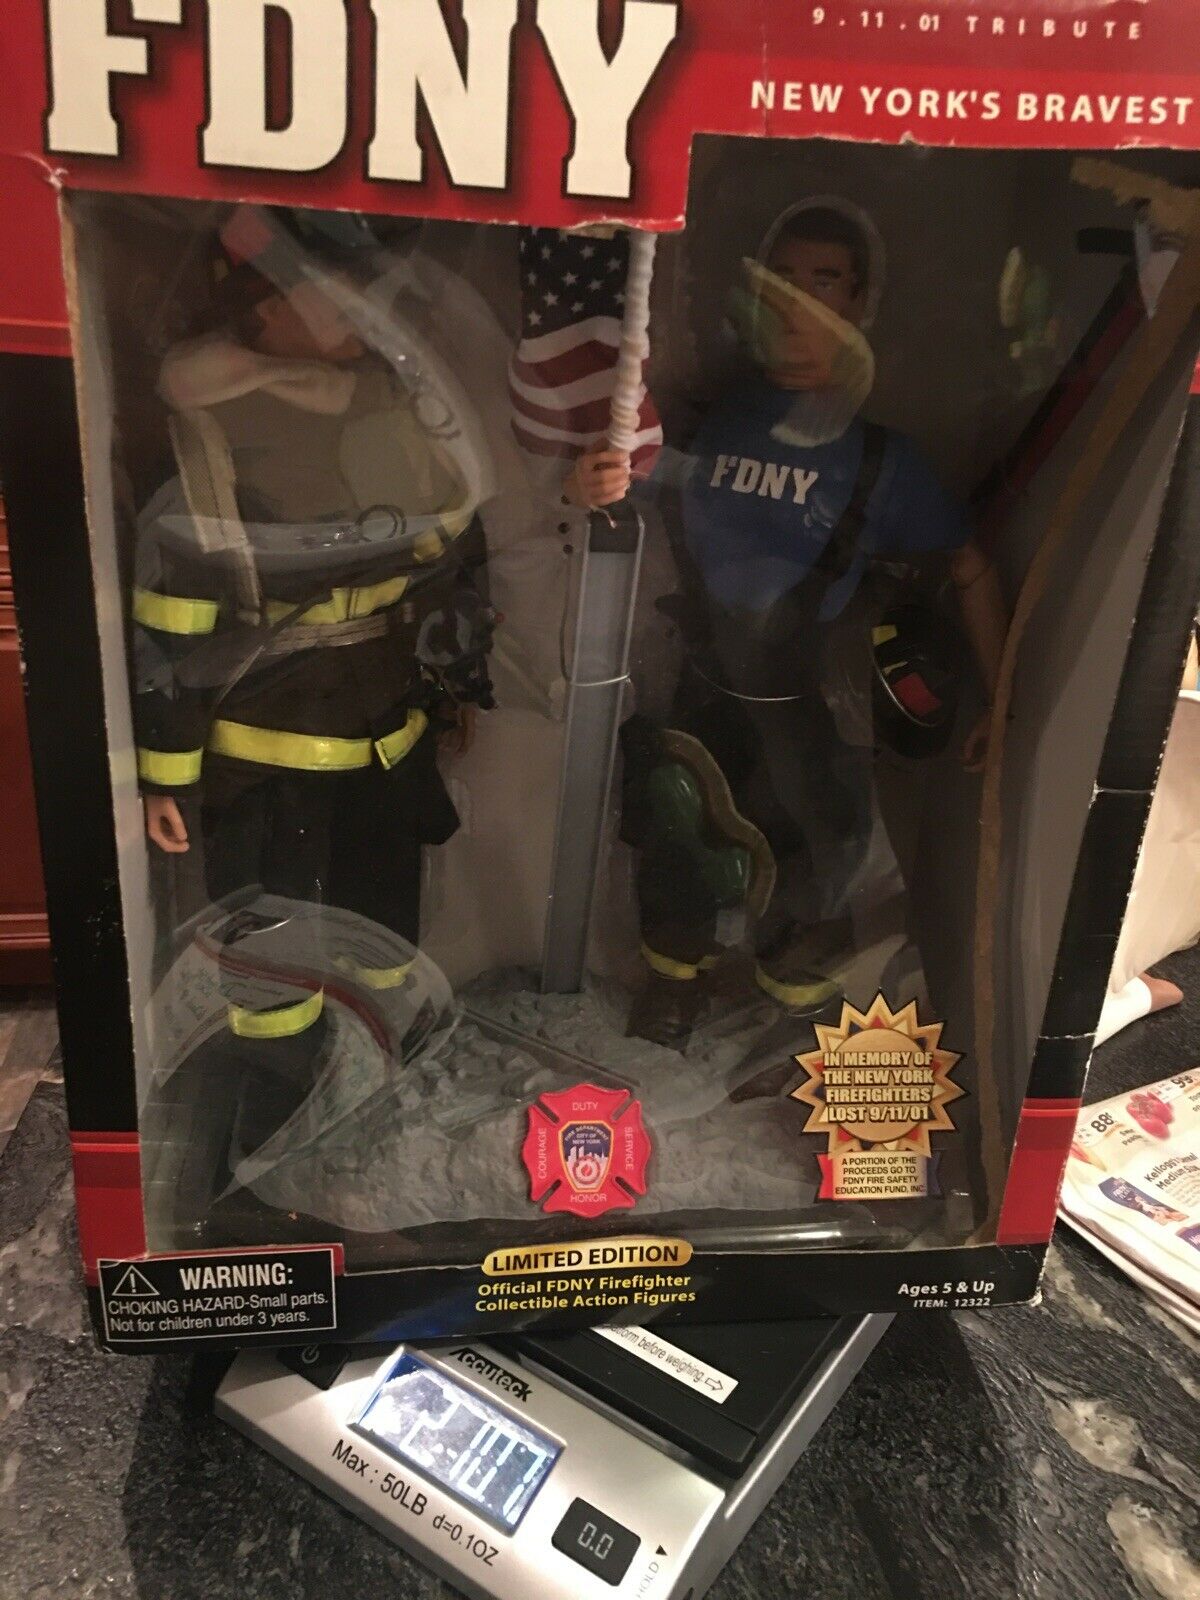 Fdny Firefighter 9/11 Tribute New York’s Bravest Collectible Action Figures